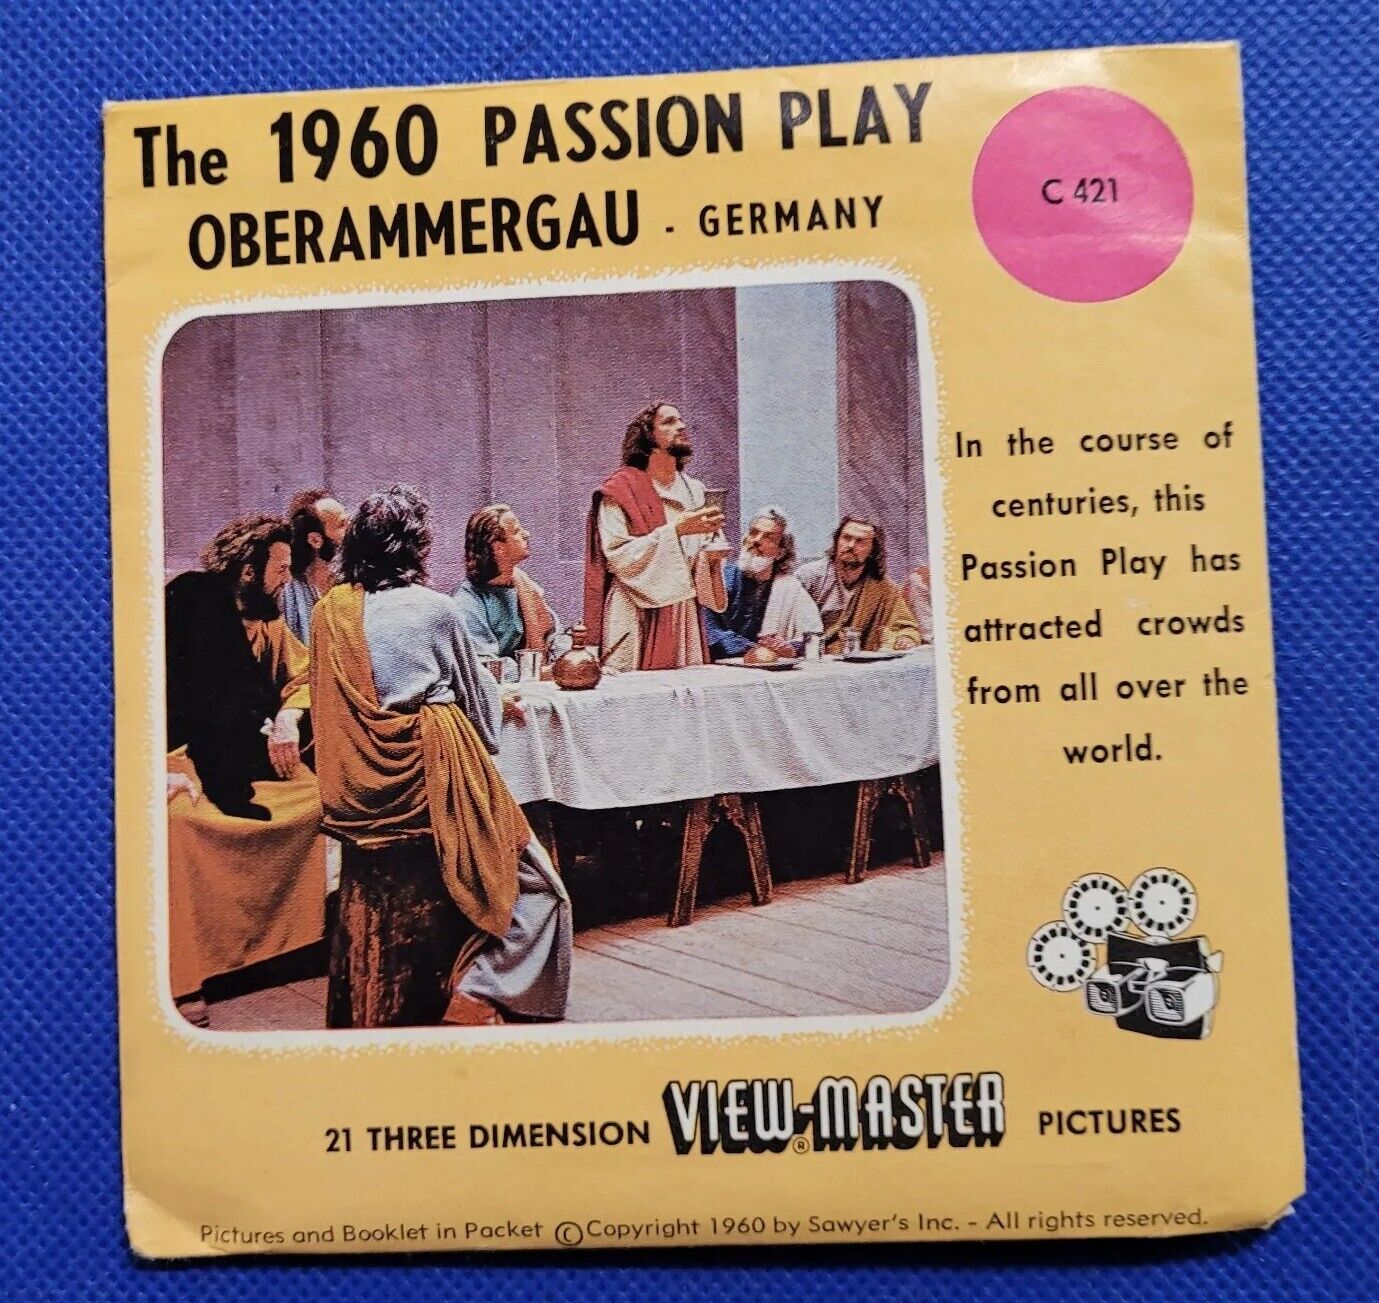 C421 The 1960 Passion Play Oberammergau Germany view-master 3 Reels Packet